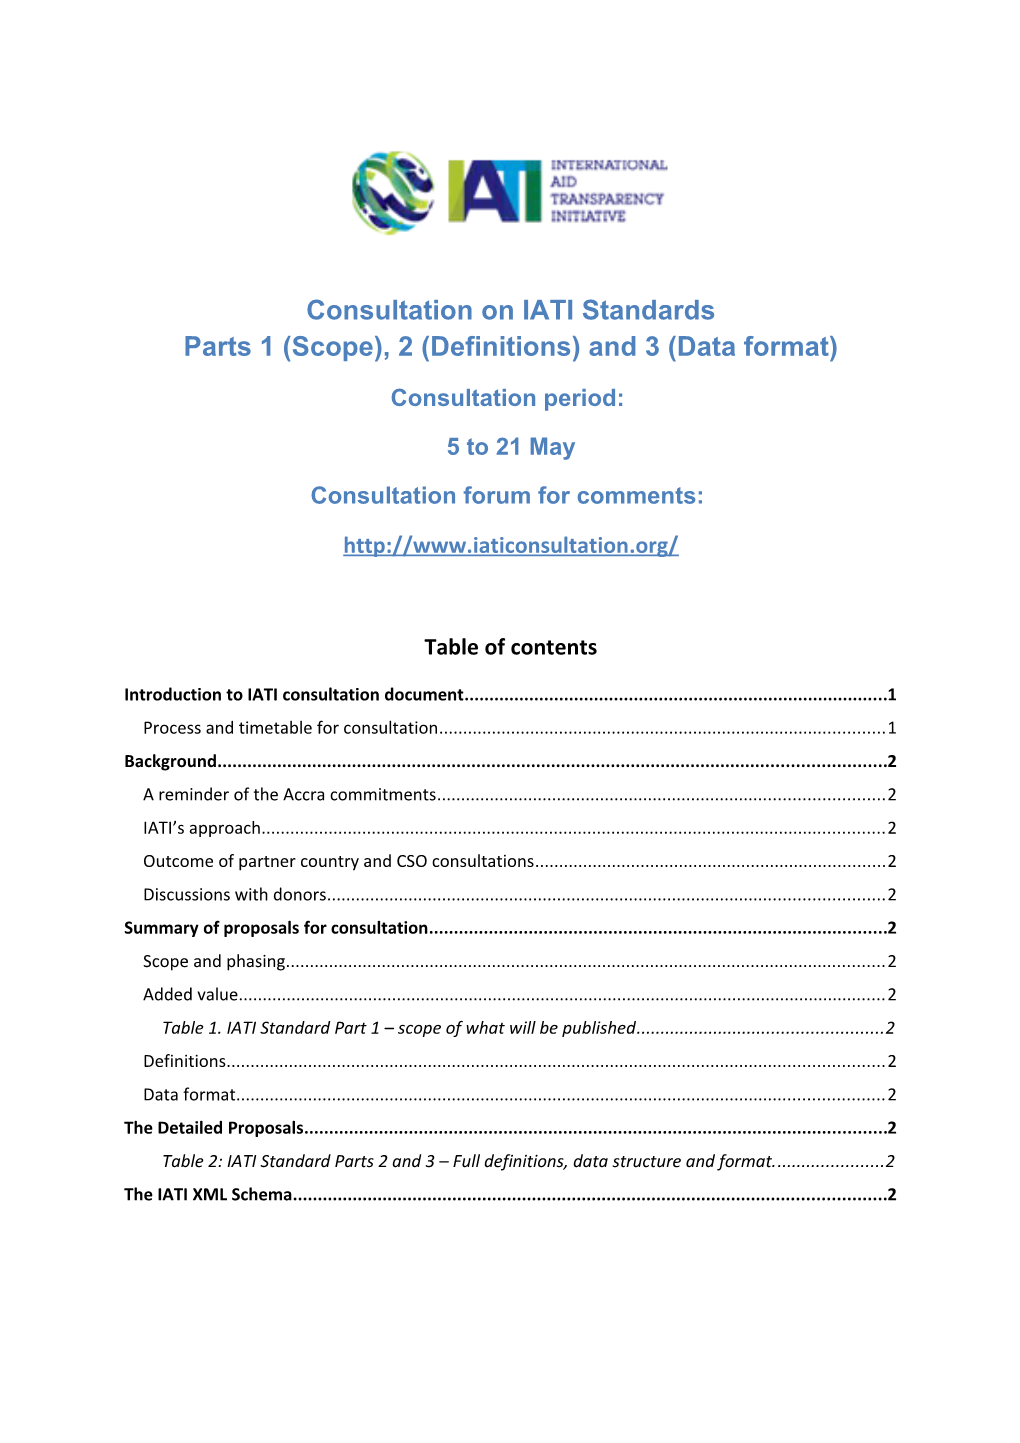 Consultation on IATI Standards Parts 1 (Scope), 2 (Definitions) and 3 (Data Format)